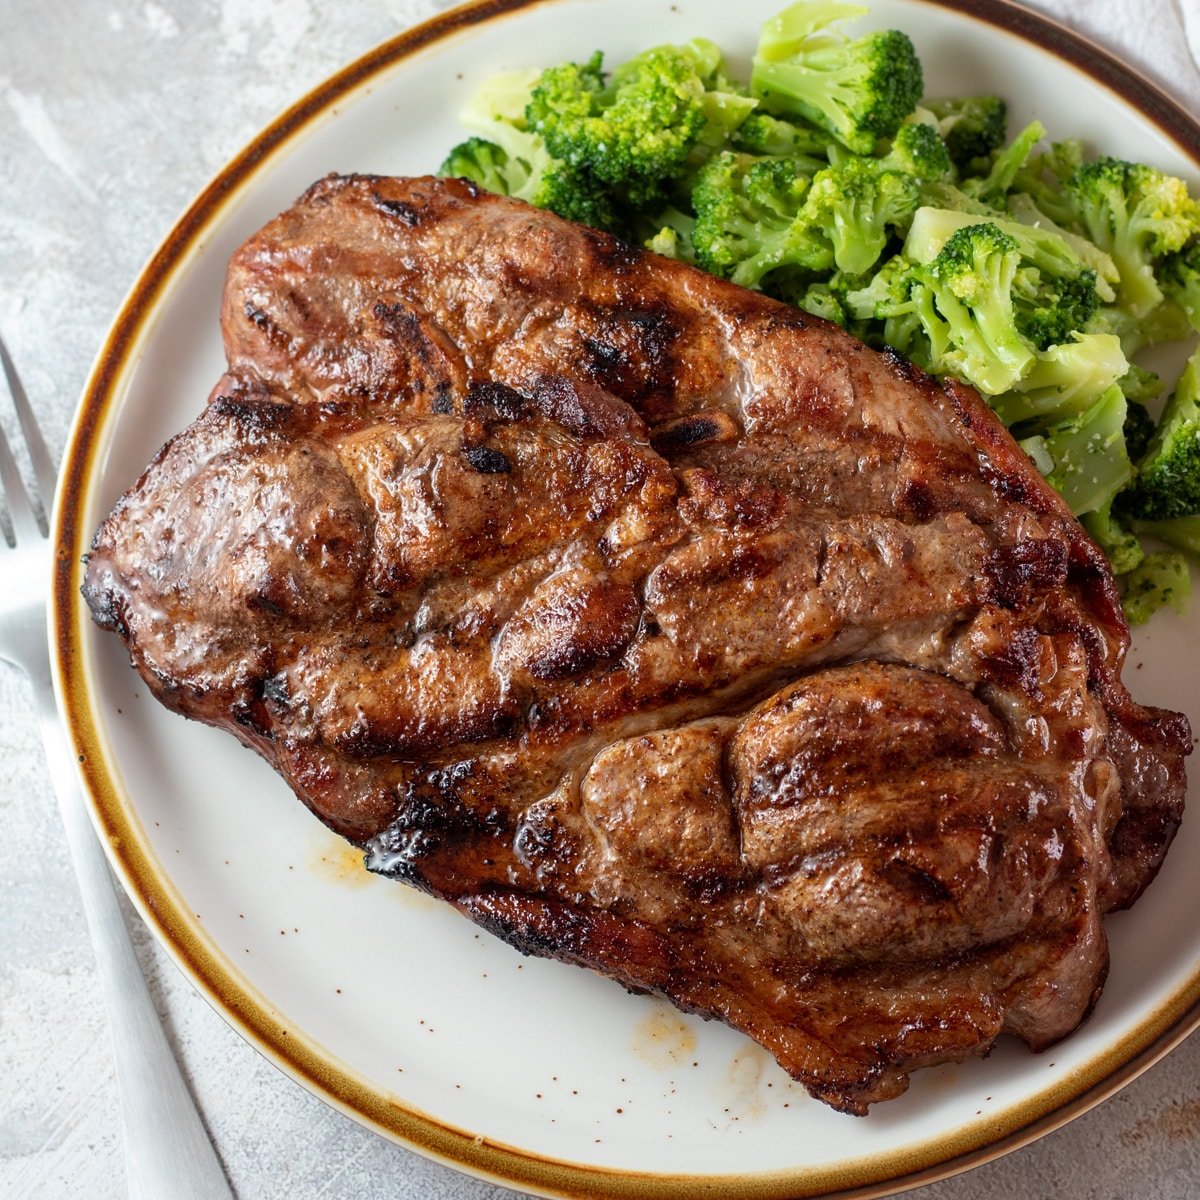 Juicy grilled pork steaks on a tan plate with steamed broccoli.